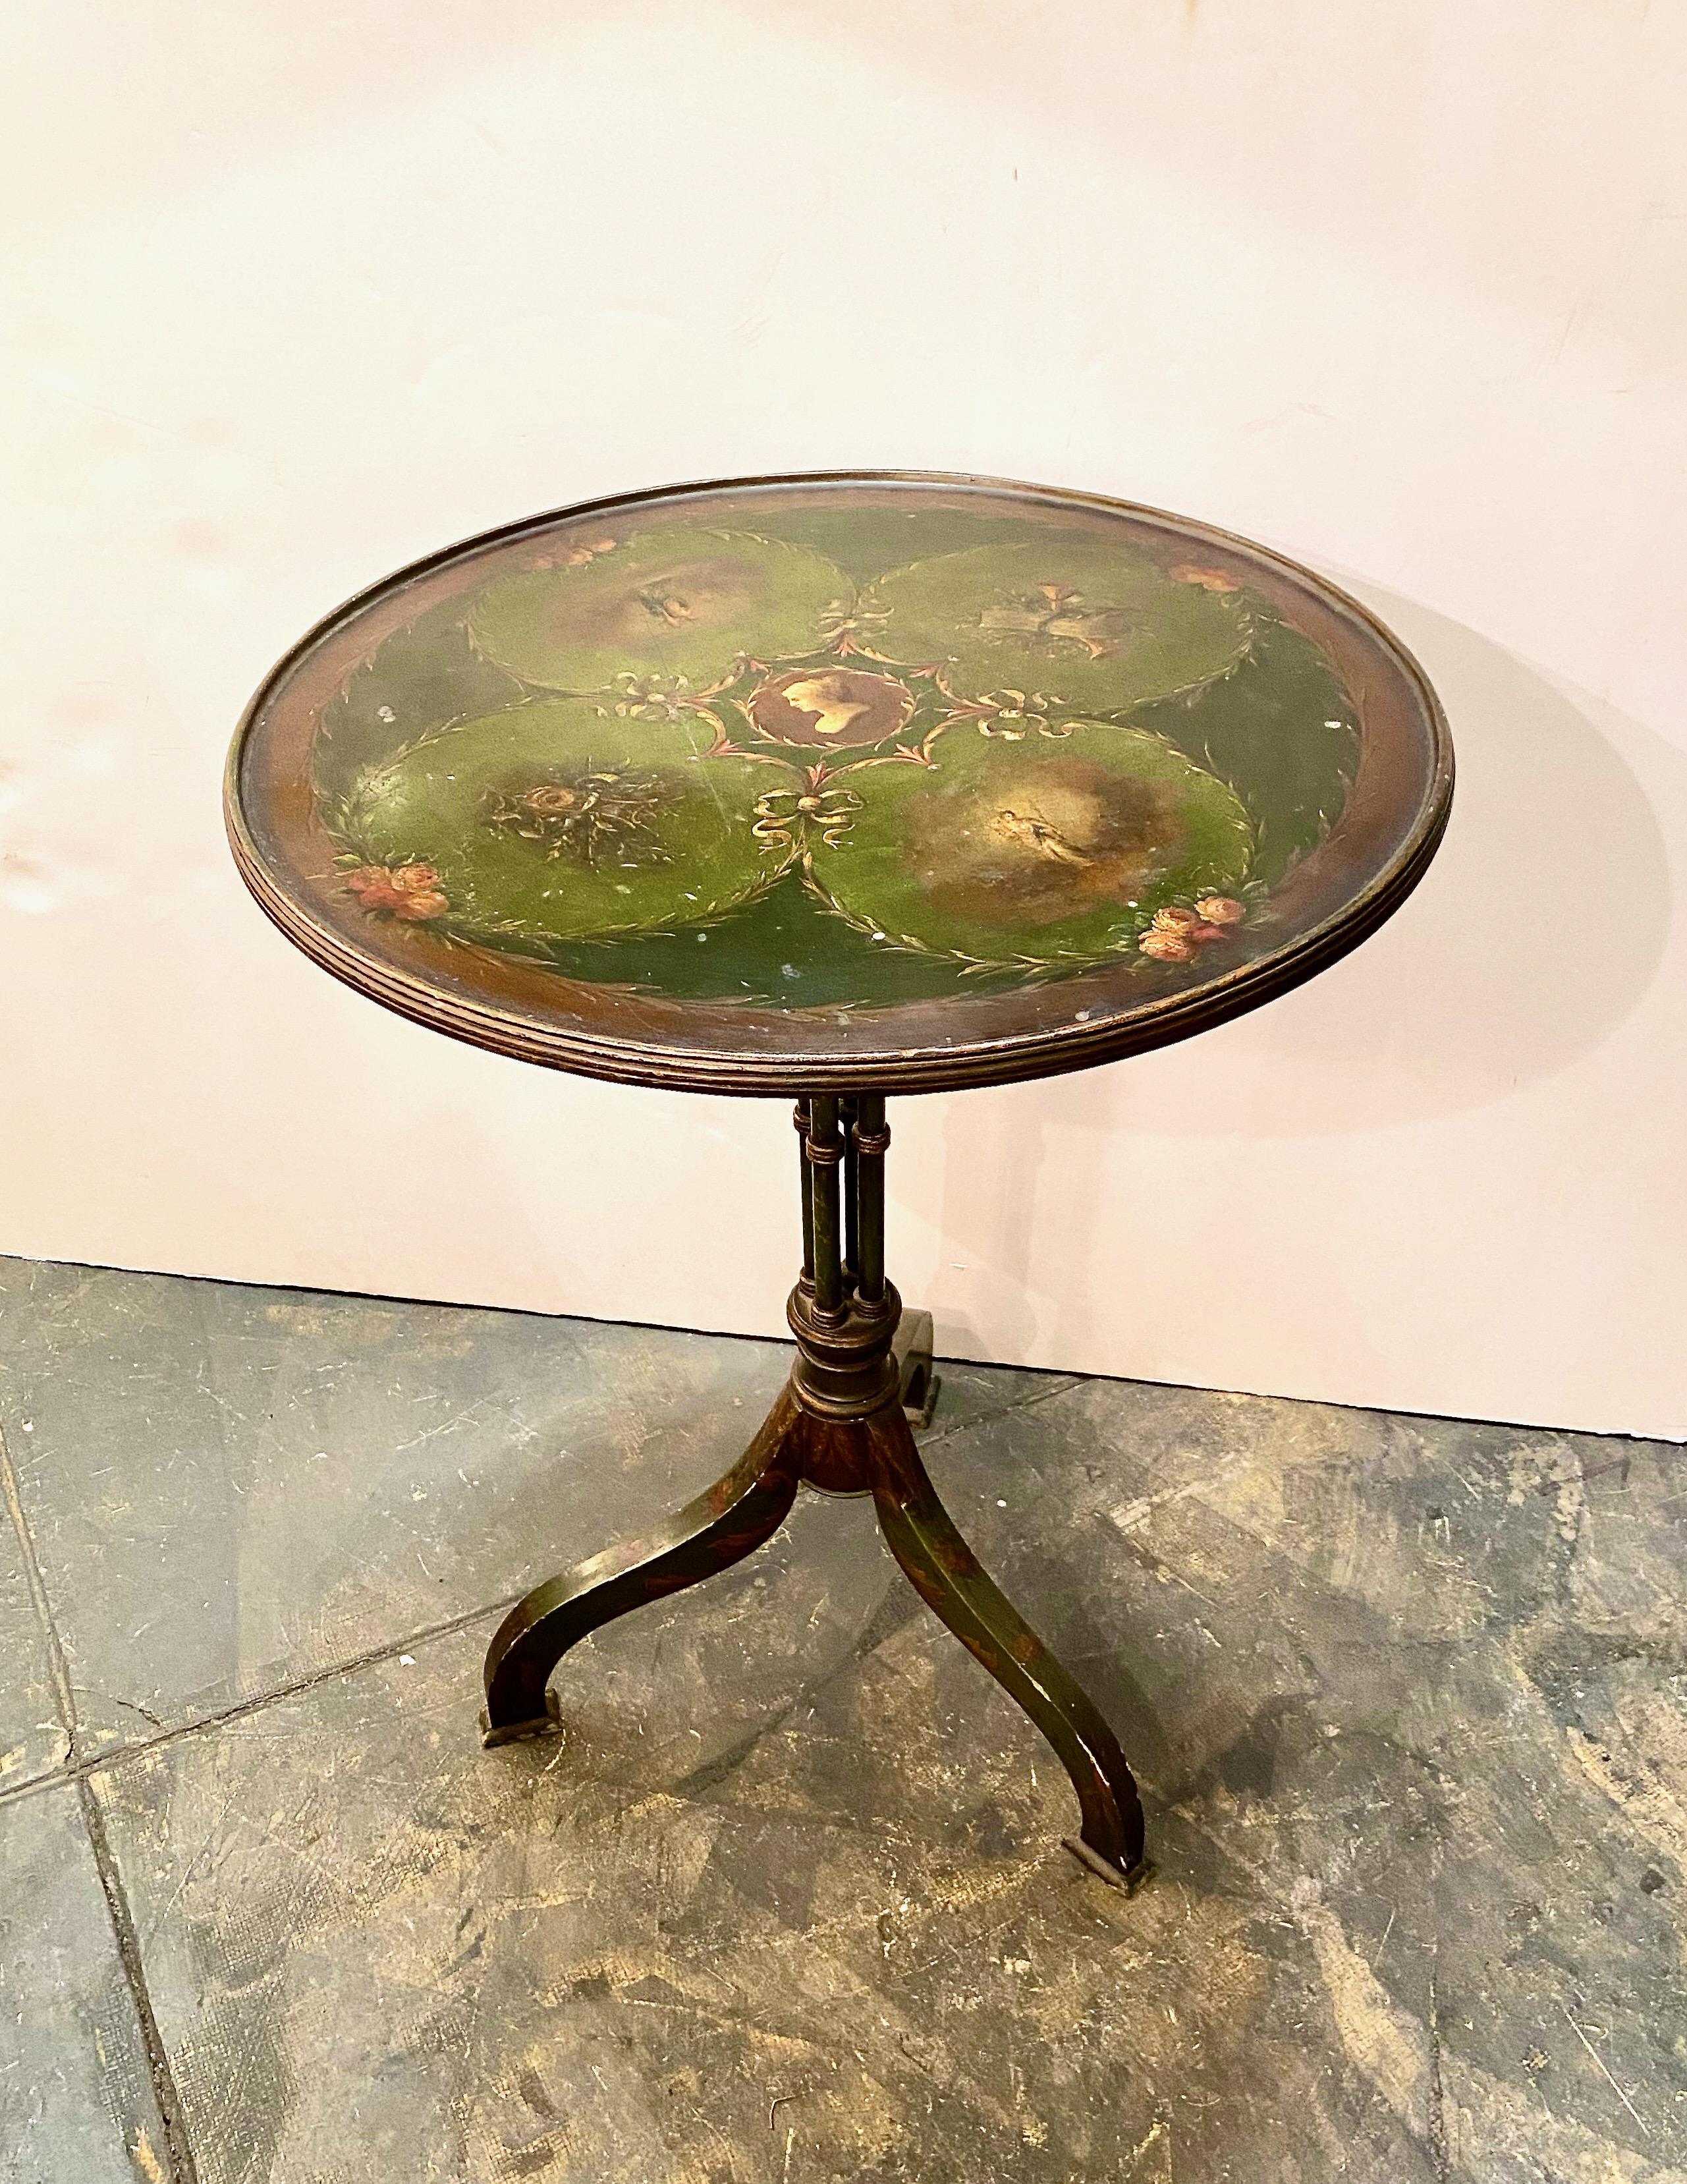 This is a charming early 19th century small tilt-top table. The top is painted in the style of Angelica Kauffman; the four-column pedestal bases is detailed in florals over a deep Italian green. The painted surface is in overall good to very good